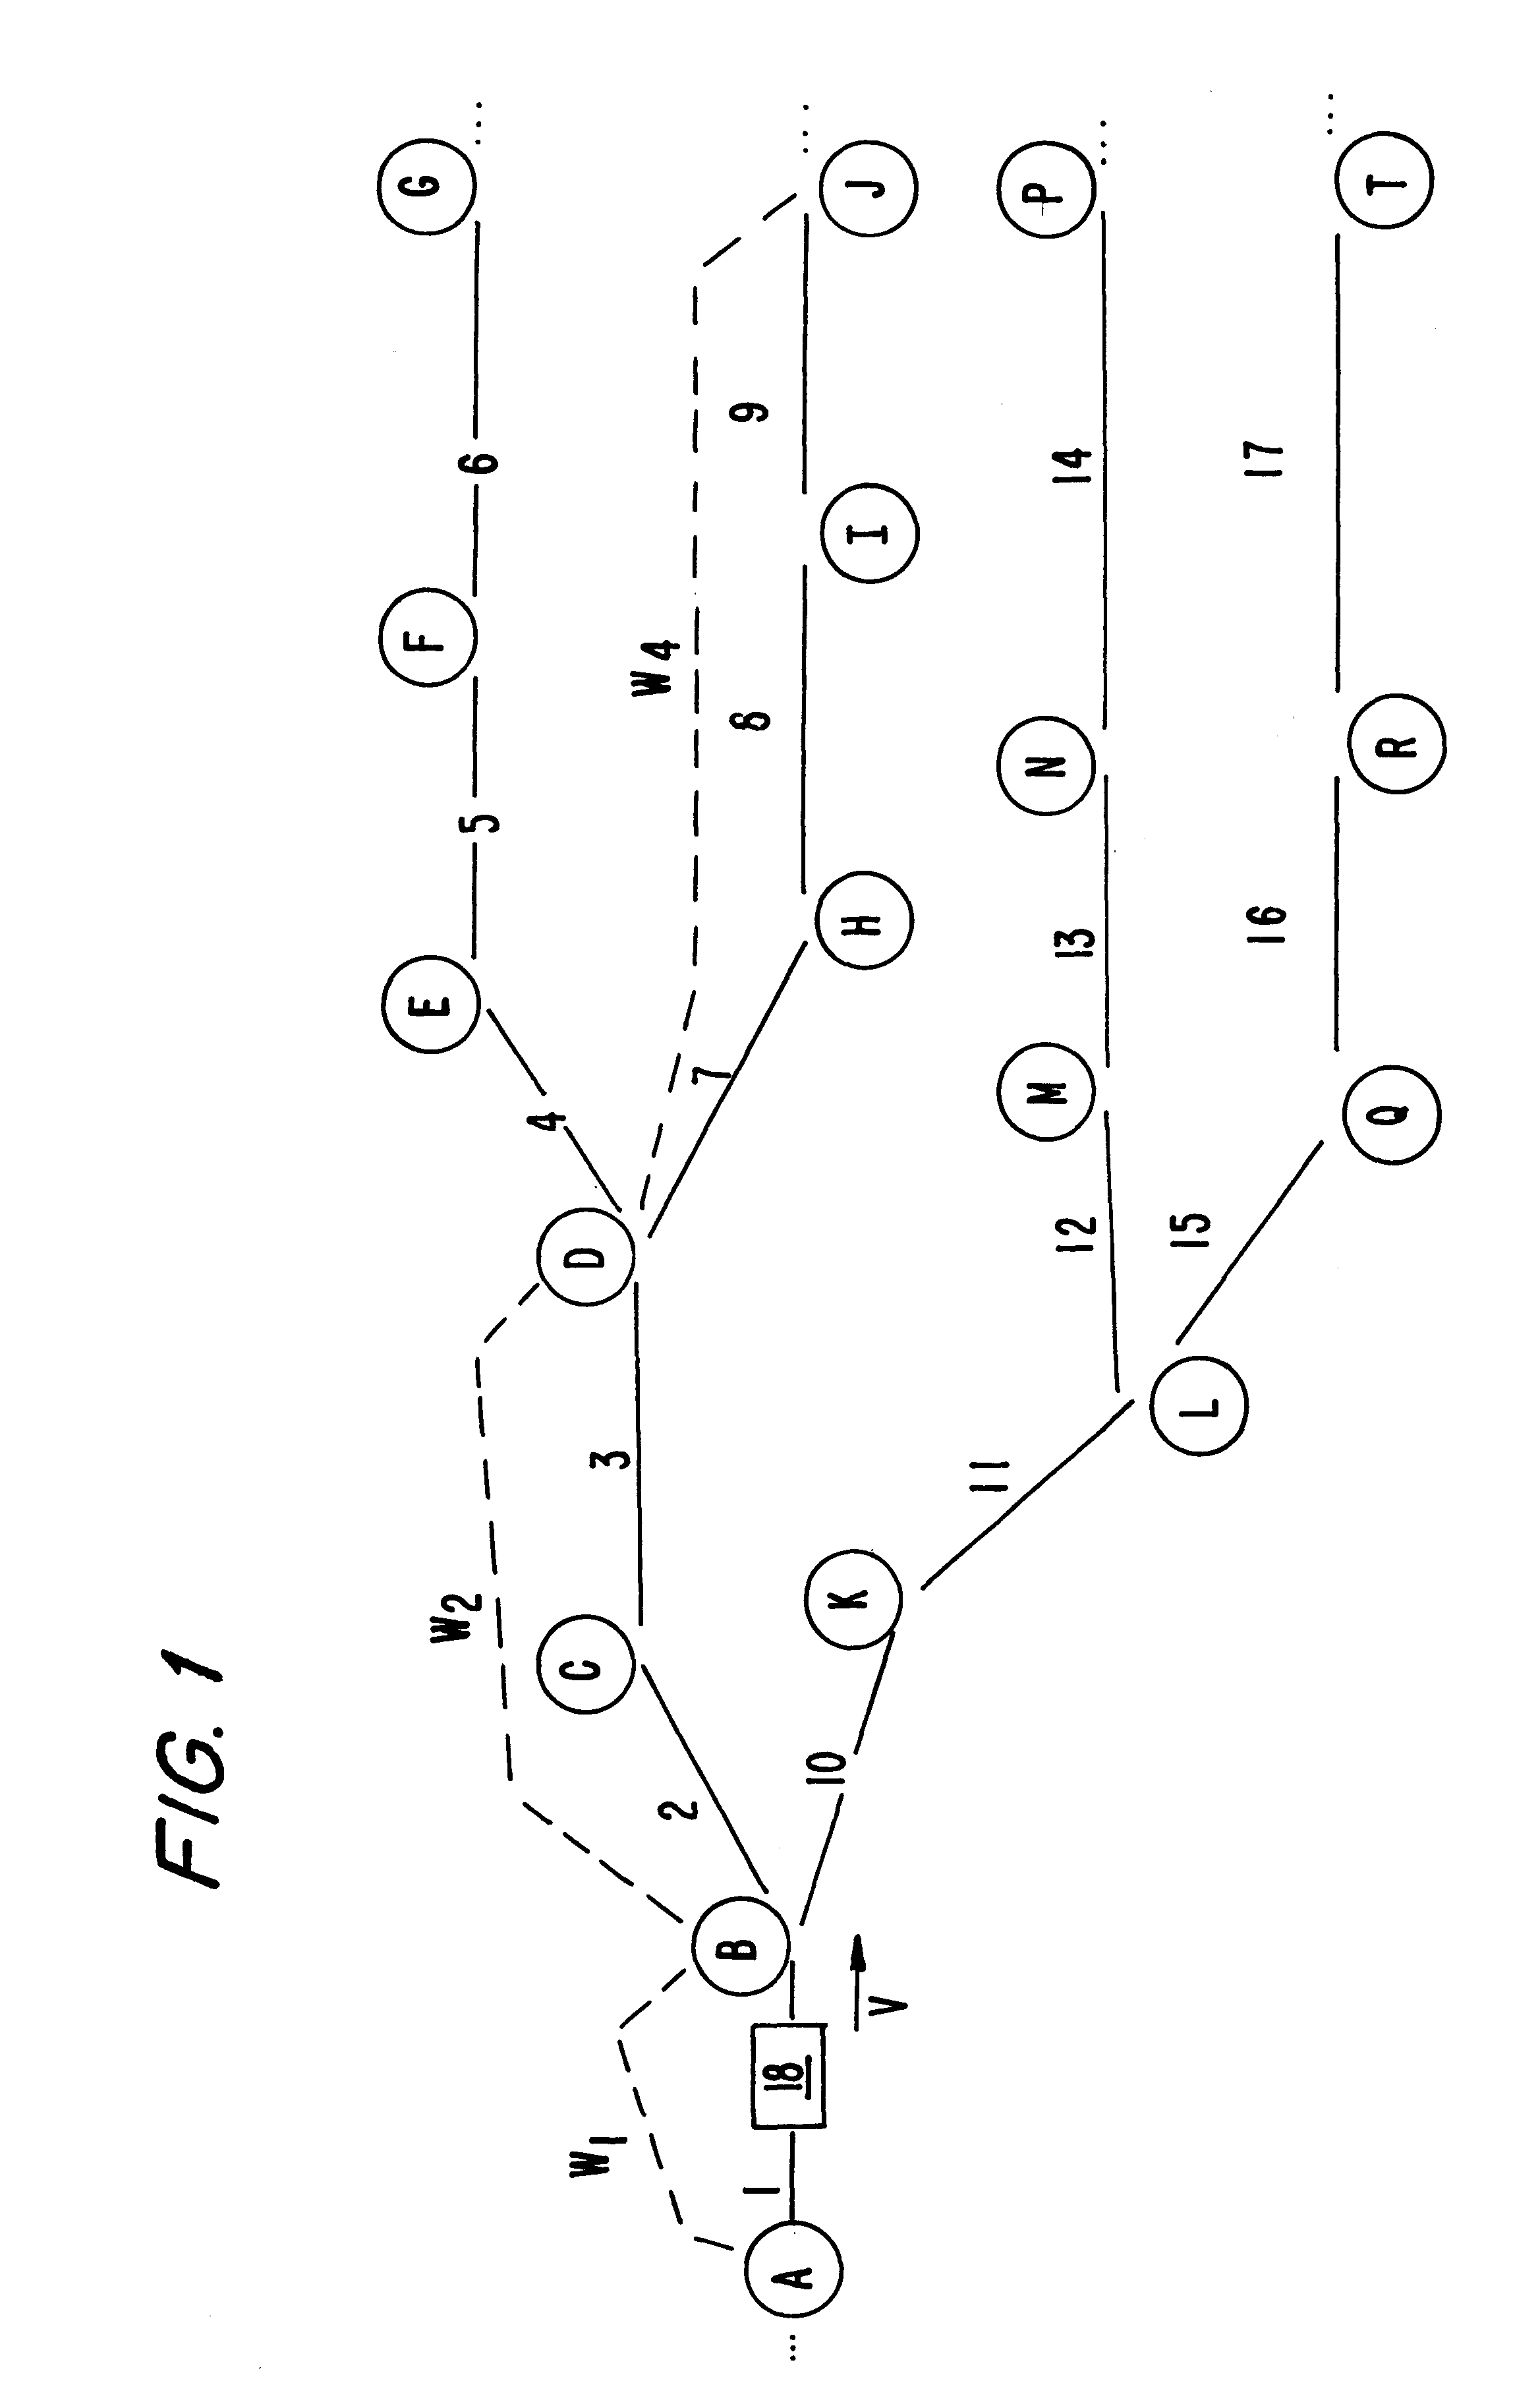 Process and apparatus for transmitting route information and analyzing a traffic network in a vehicular navigation system